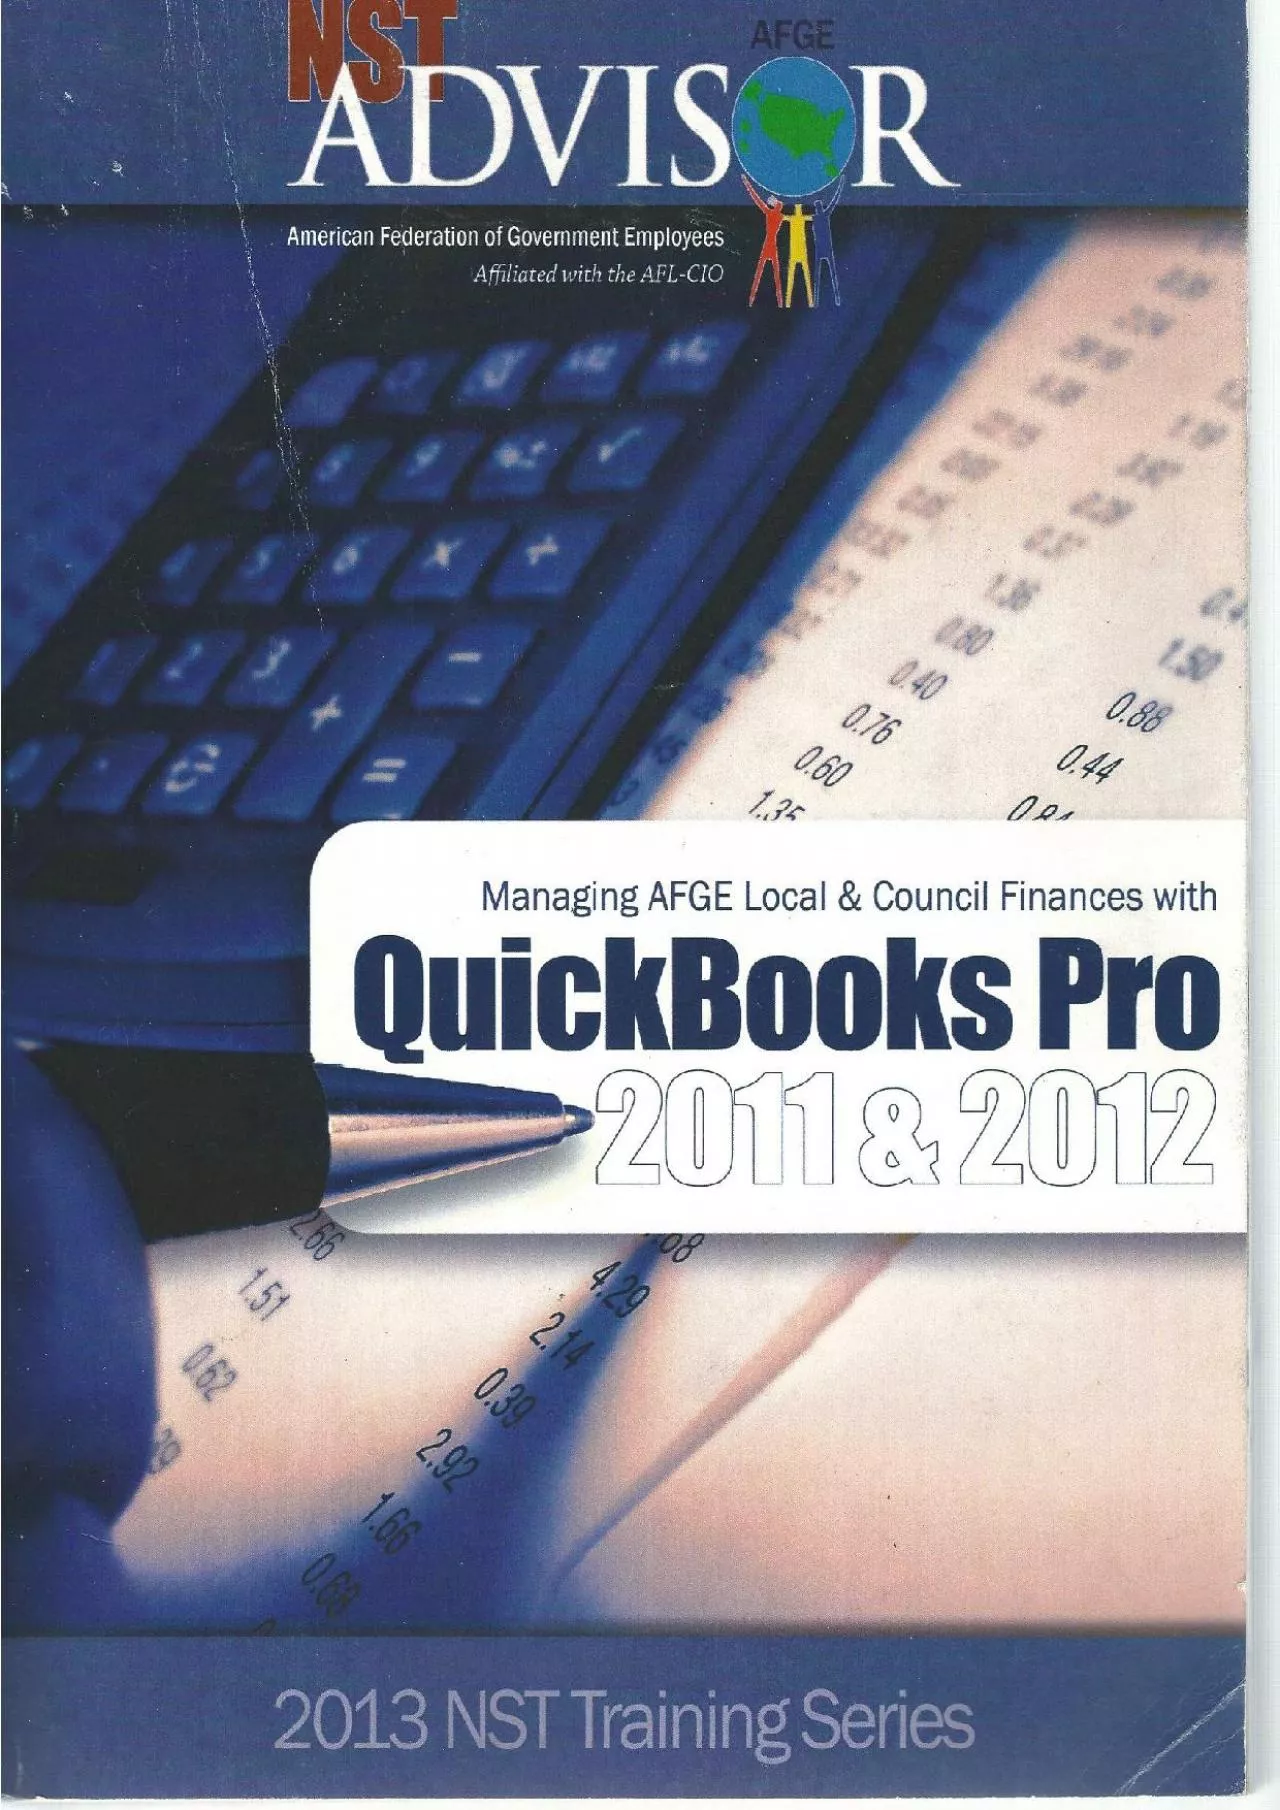 (BOOS)-Managing AFGE Local  Council Finances with Quickbooks Pro, 2011  2012 (2013 NST